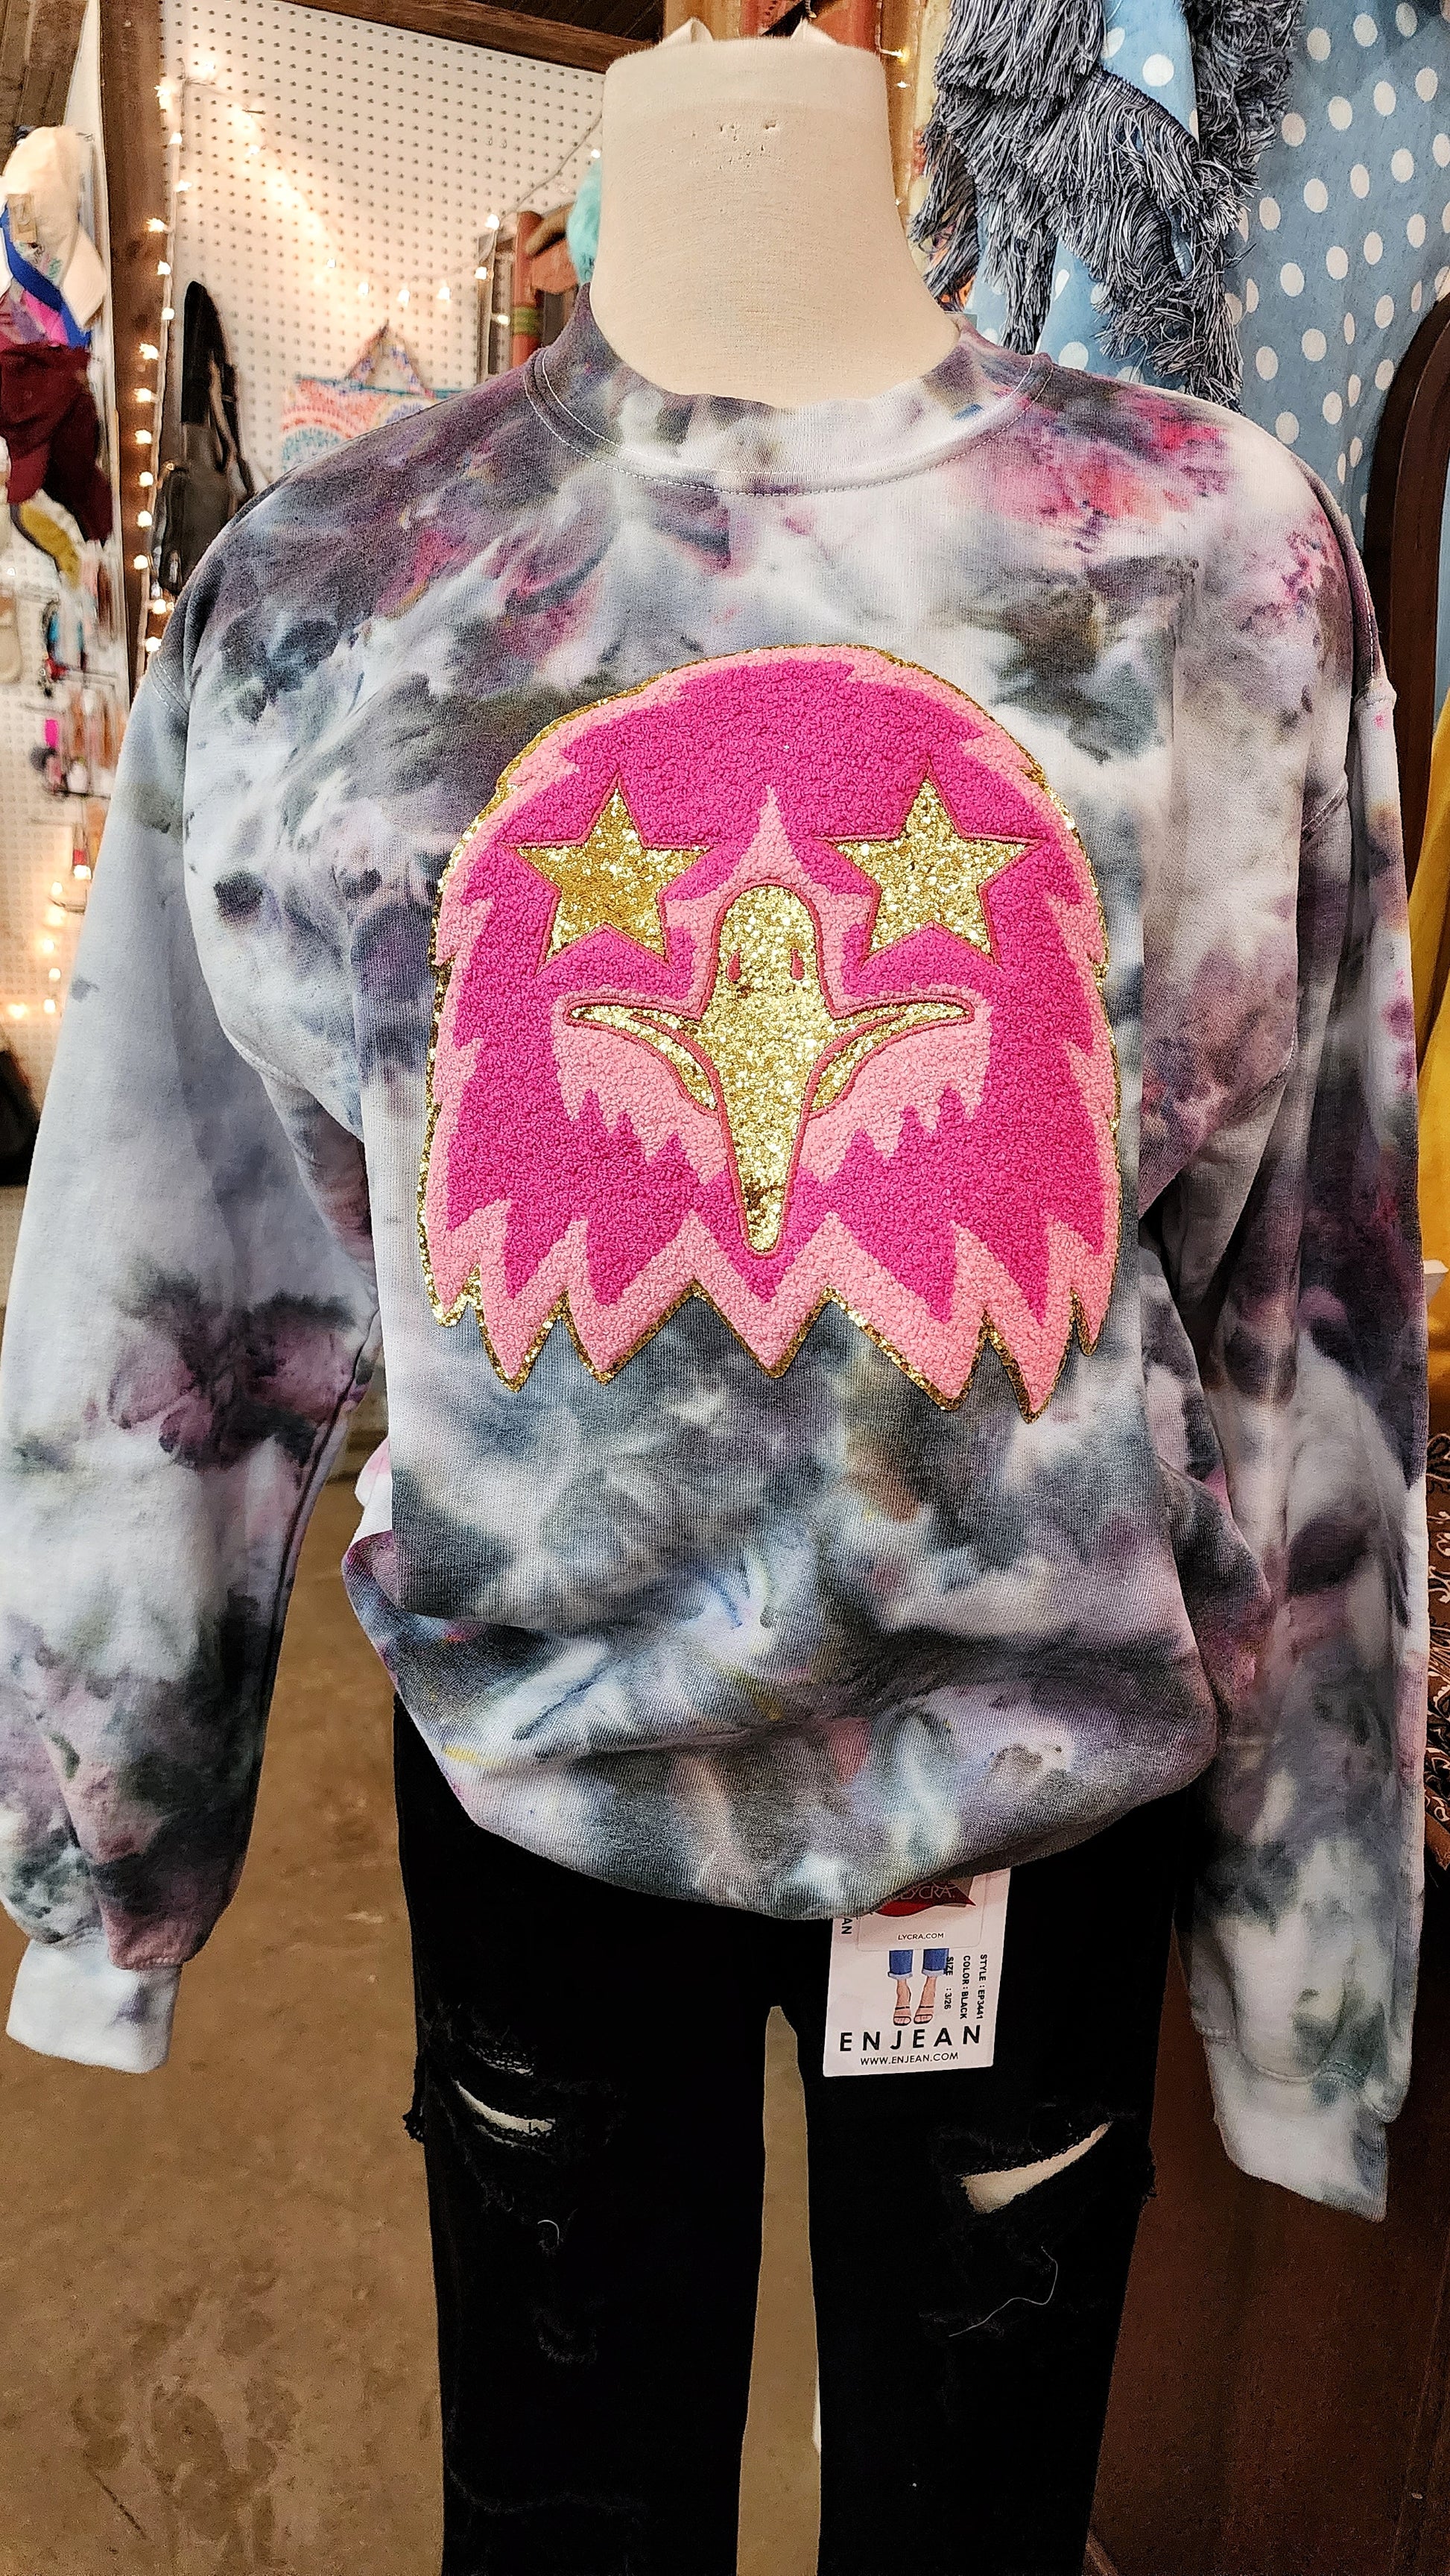 Prepp Eagle Mascot Sweat Shirt - Tie Dyed. Eagle is a two toned pink chenille patch with glitter gold beak and star eyes. Sweatshirt is white with tie dye colors of black, pink, purples, and hints of yellow.